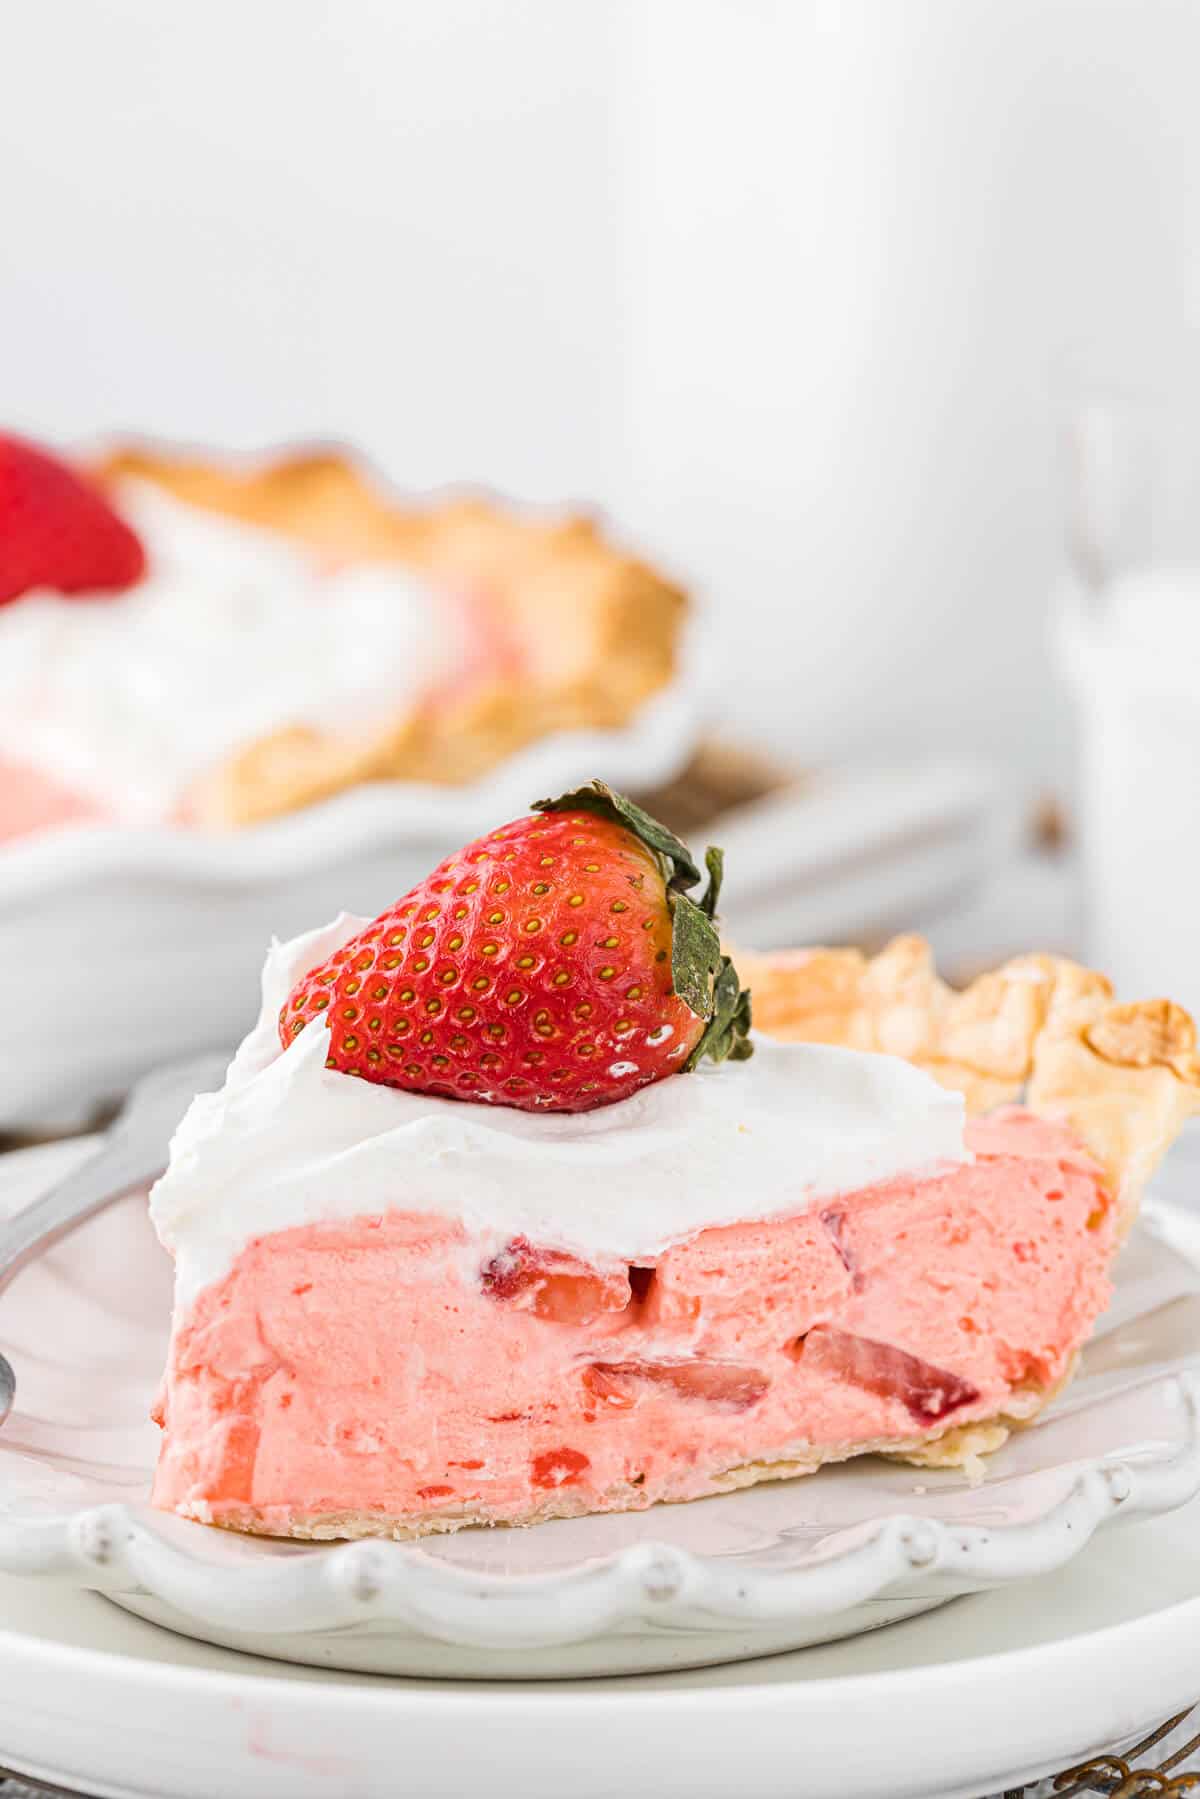 A slice of strawberry cream pie on a plate.